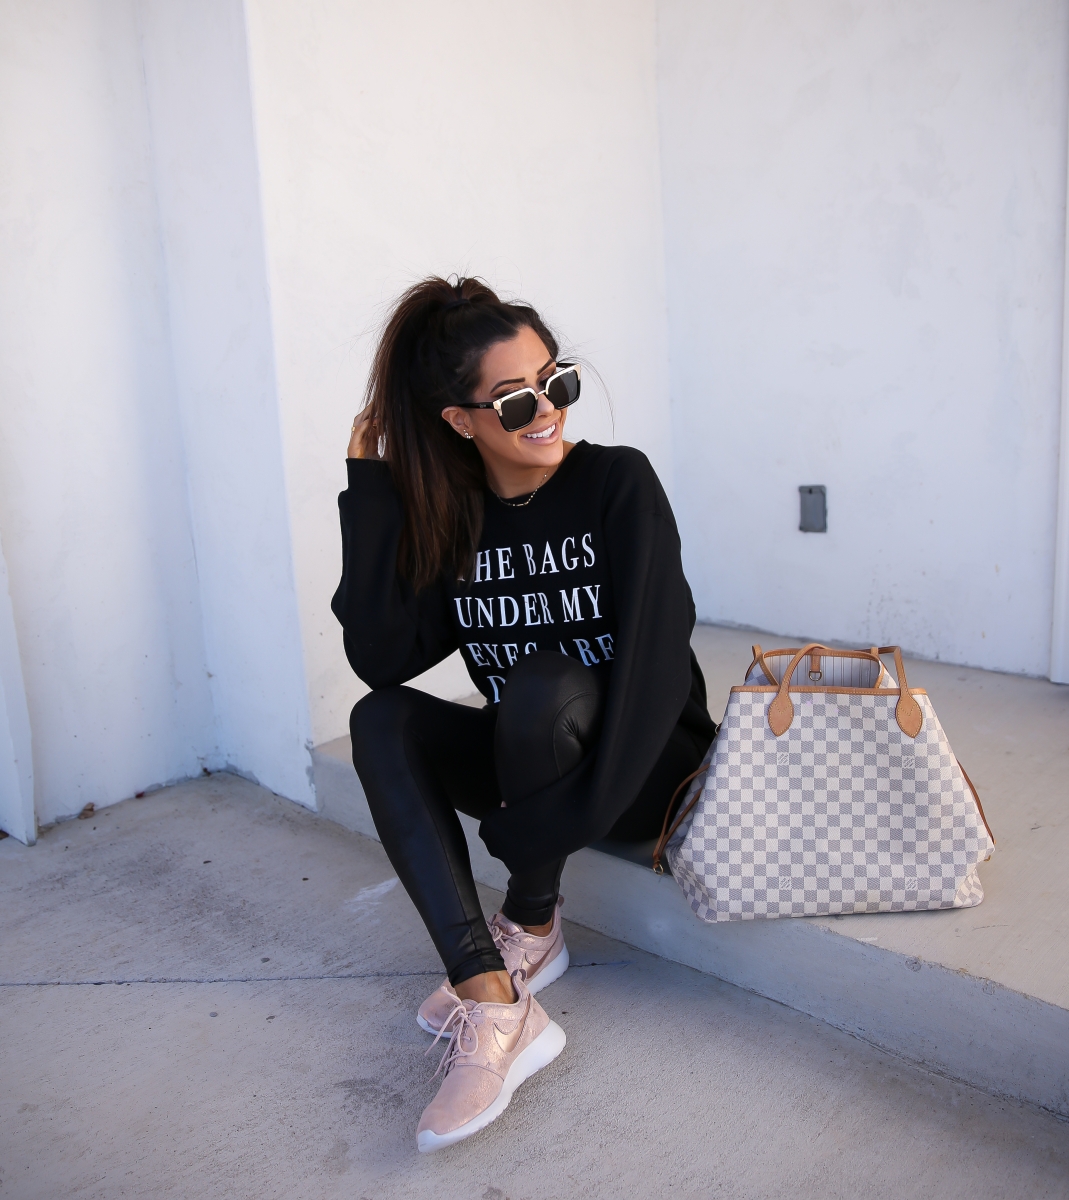 bags under my eyes are designer sweatshirt, jaclyn hill quay sunglasses, emily ann gemma, rose gold sparkly nike roshe, spanx faux leather leggings-2